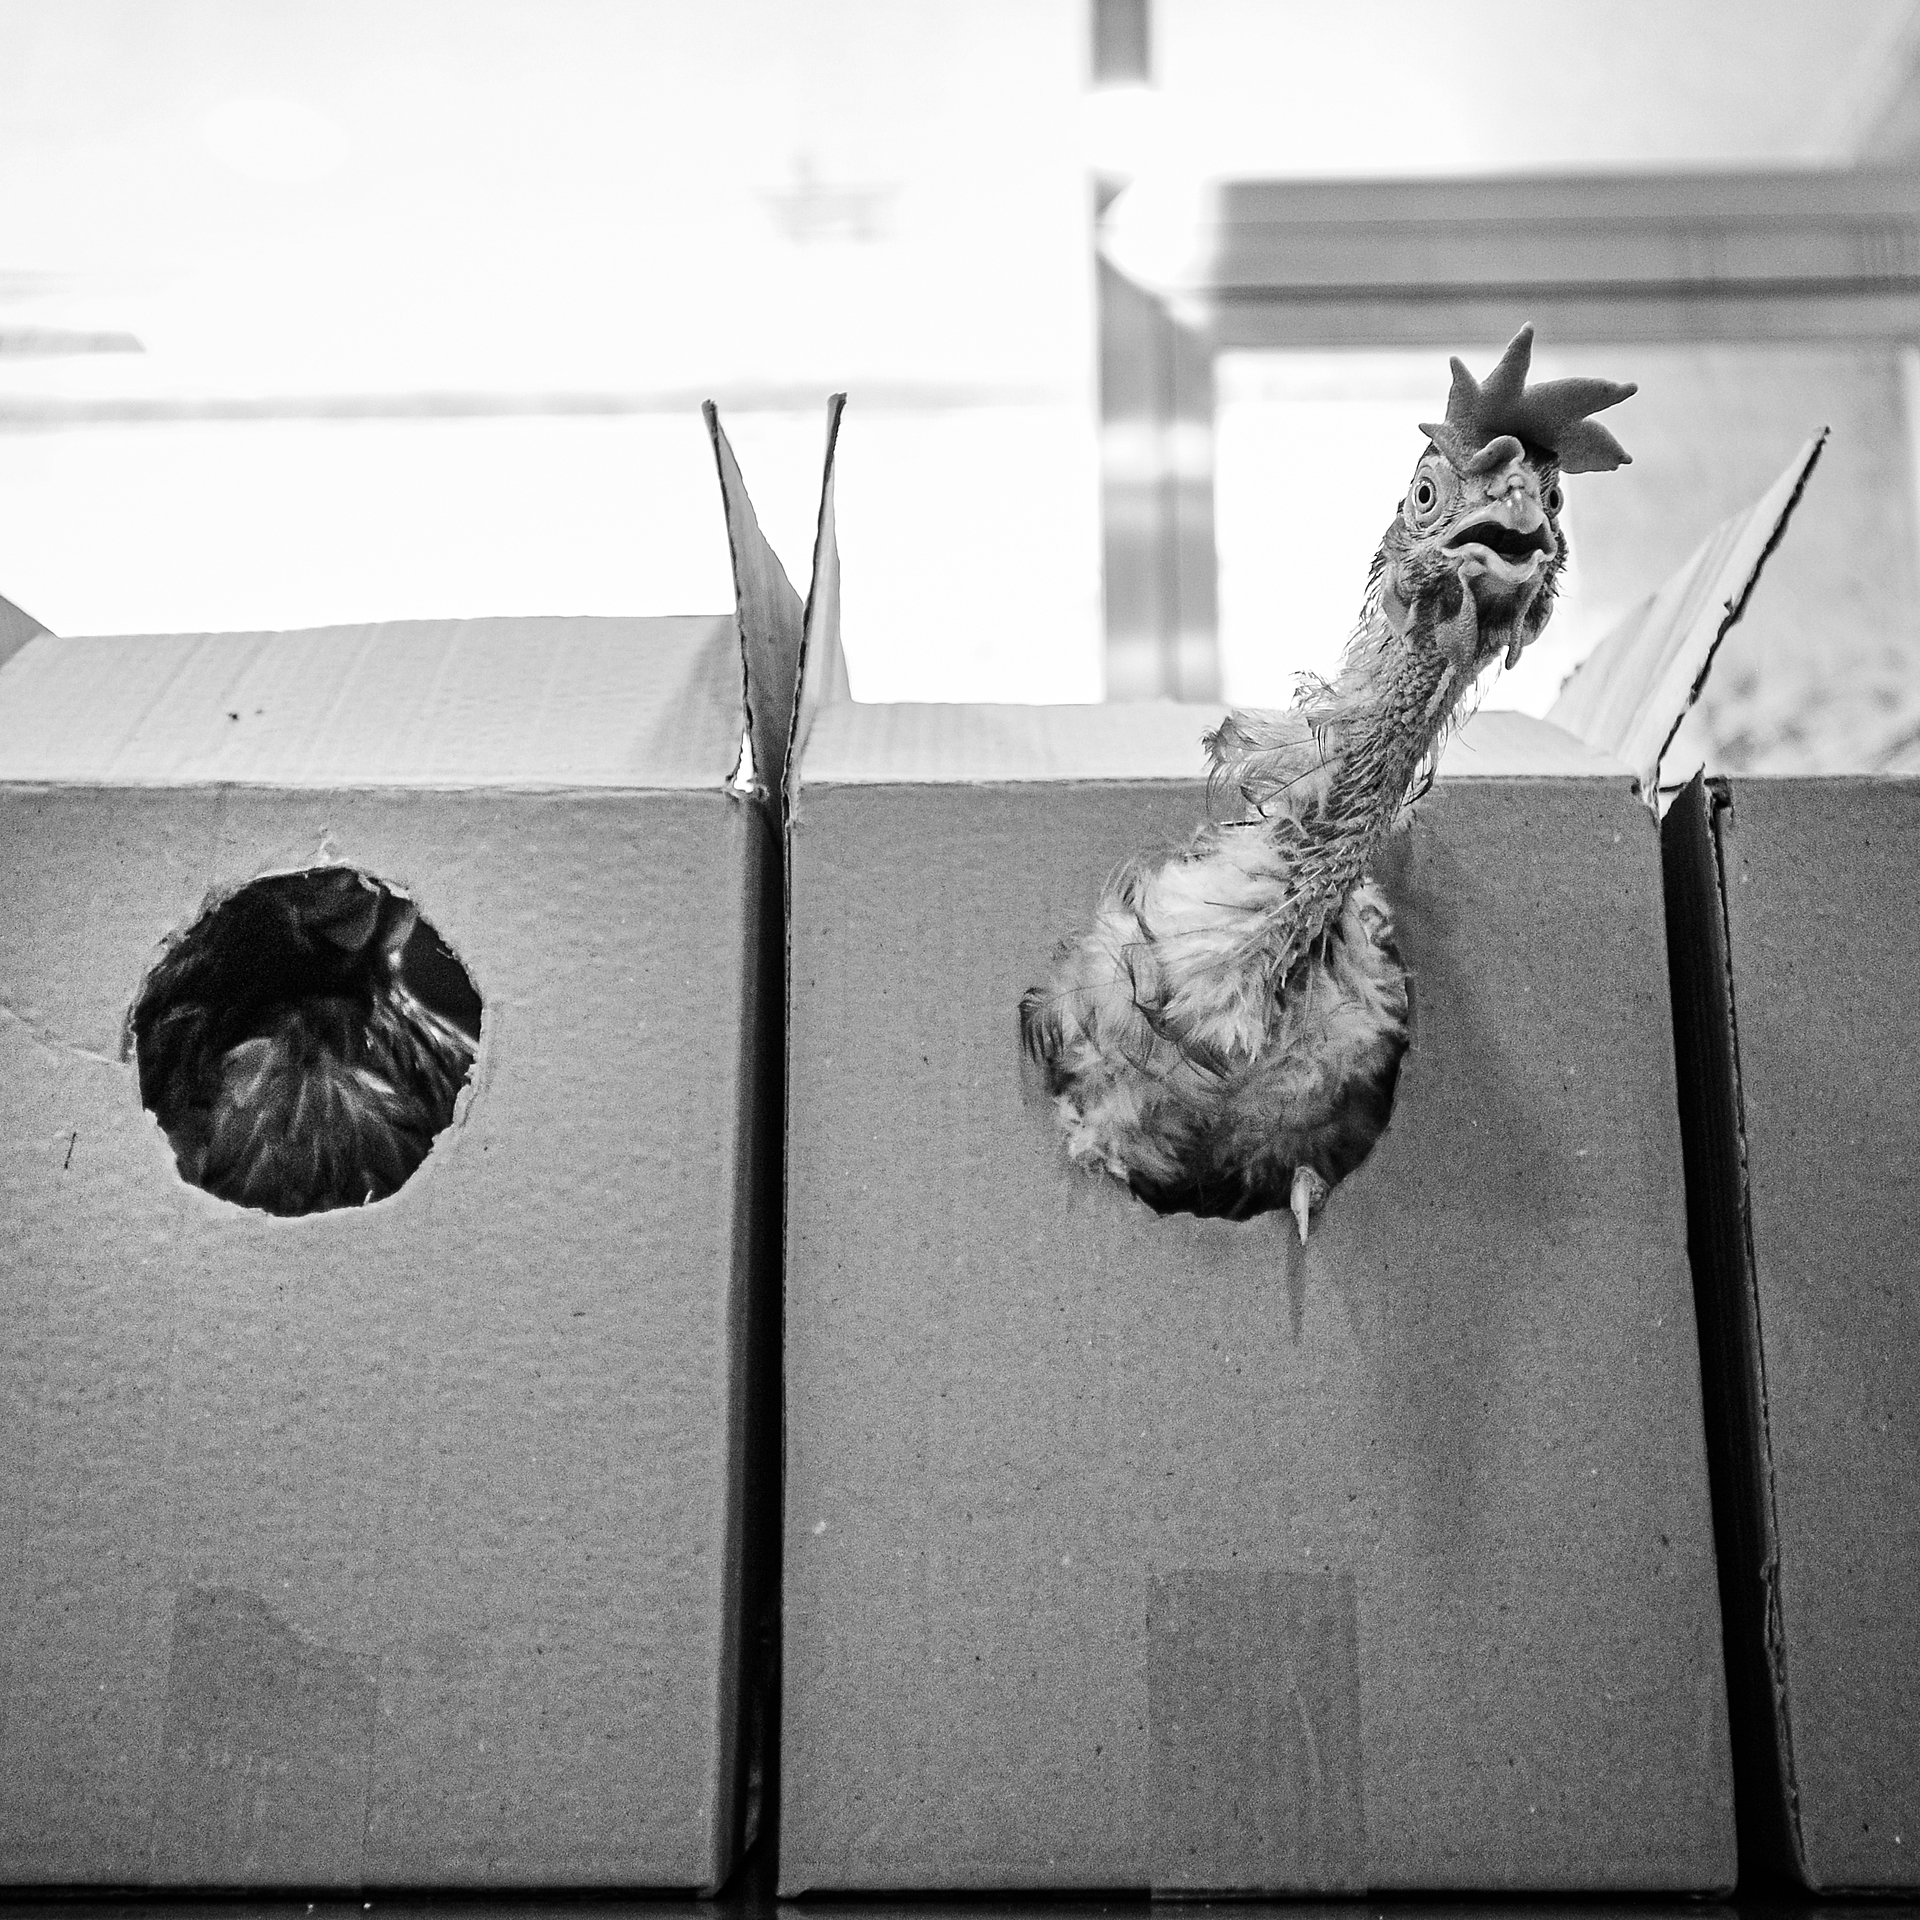 The Animal Equality team bring the rescued hens to the veterinarian for care. Spain, 2010. Jo-Anne McArthur / Animal Equality / We Animals